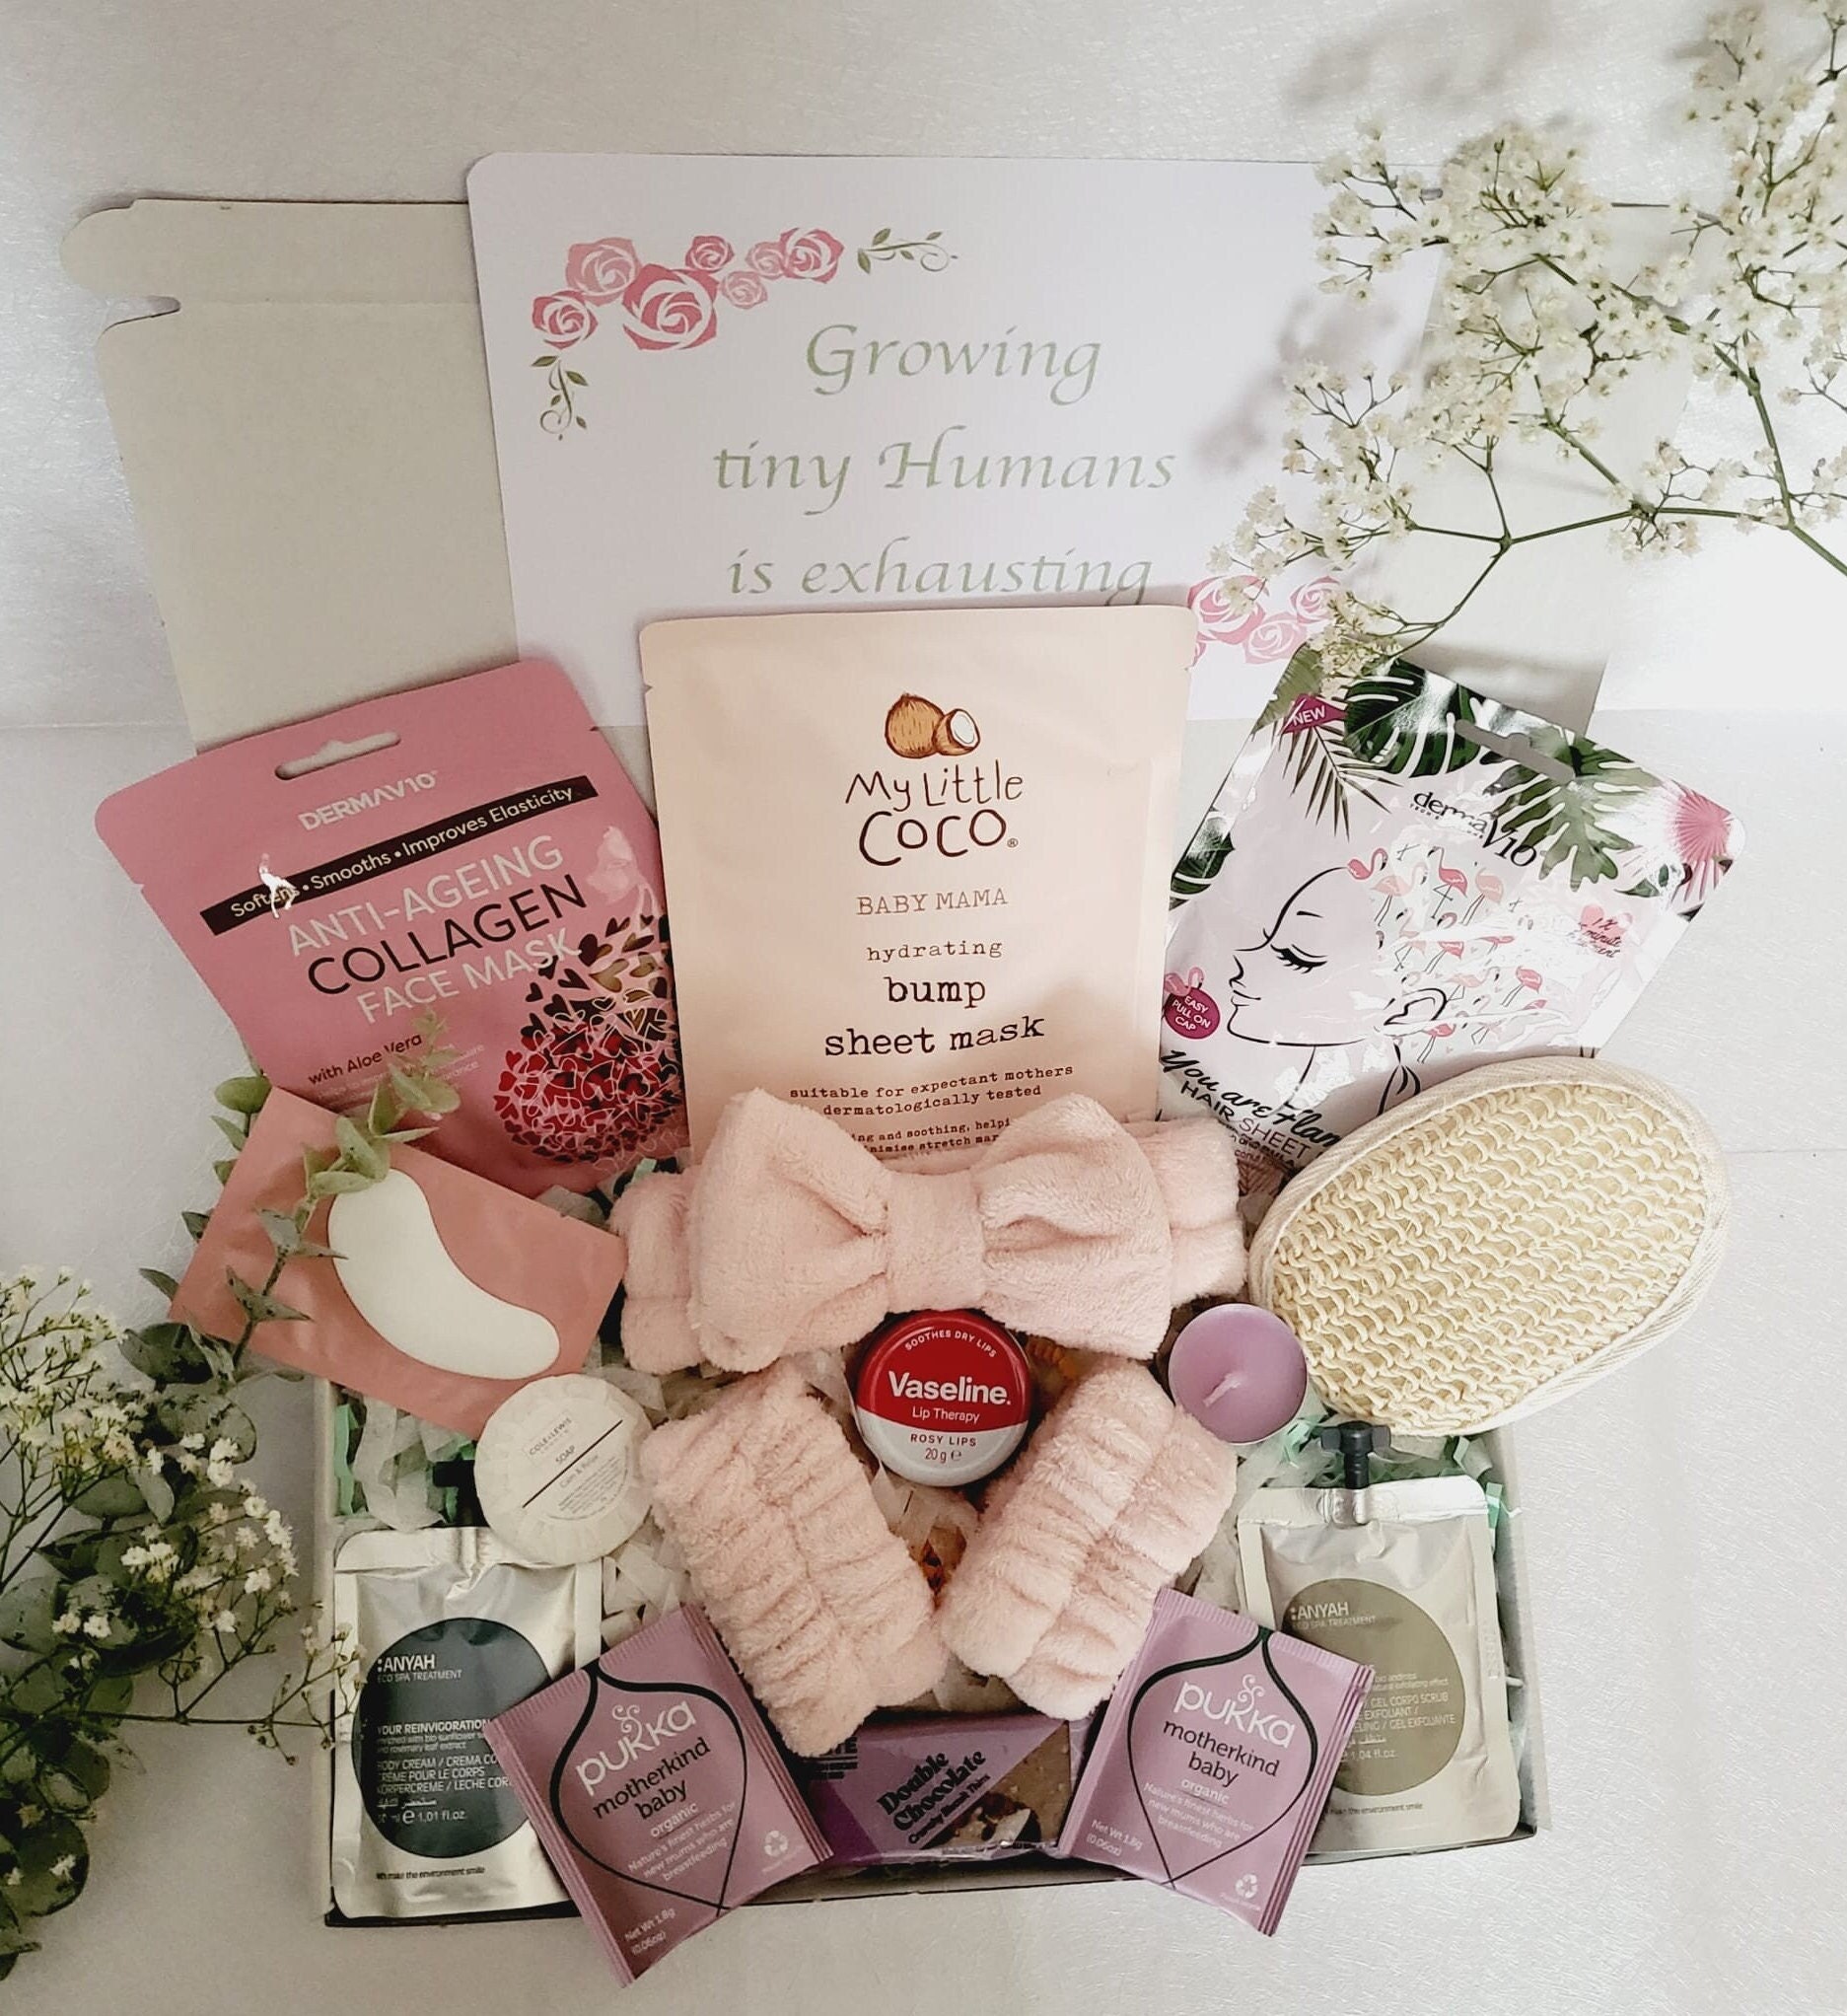 Christmas Gifts for Mom, Spa Gift Set for Women, Birthday Gifts for Mom,  New Mom Gifts for Women, Gifts for Mom from Daughter & Son, Presents for  Mom